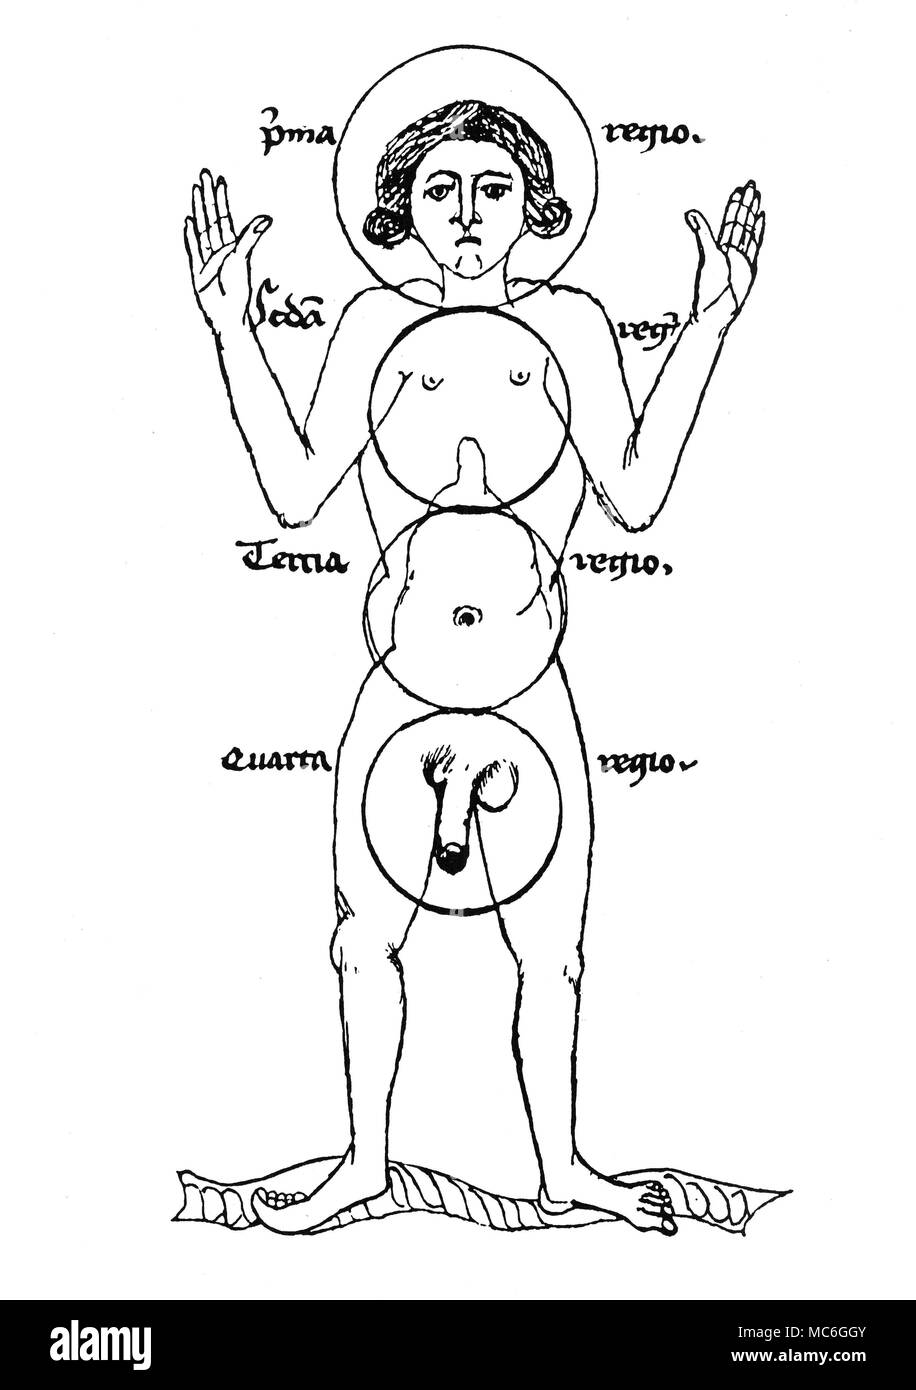 MEDICAL Mediaeval drawing (early 15th century) showing the four 'regions' of the human body. The top (pma - that is, prima) that part of the body which animates. The second (seda,- that is, secunda) is that part of the body relating to spiritual things. The third (terna) is that in which nutrition takes place, while the fourth (quarta) is that part which contains the power of generation. This diagram reveals the influence of alchemy on mediaeval medicine - the areas of the Three Principles of Salt, Mercury and Sulphur are clearly defined. From 'Eine Pariser 'Ketham' Handshfit aus der zeit Stock Photo